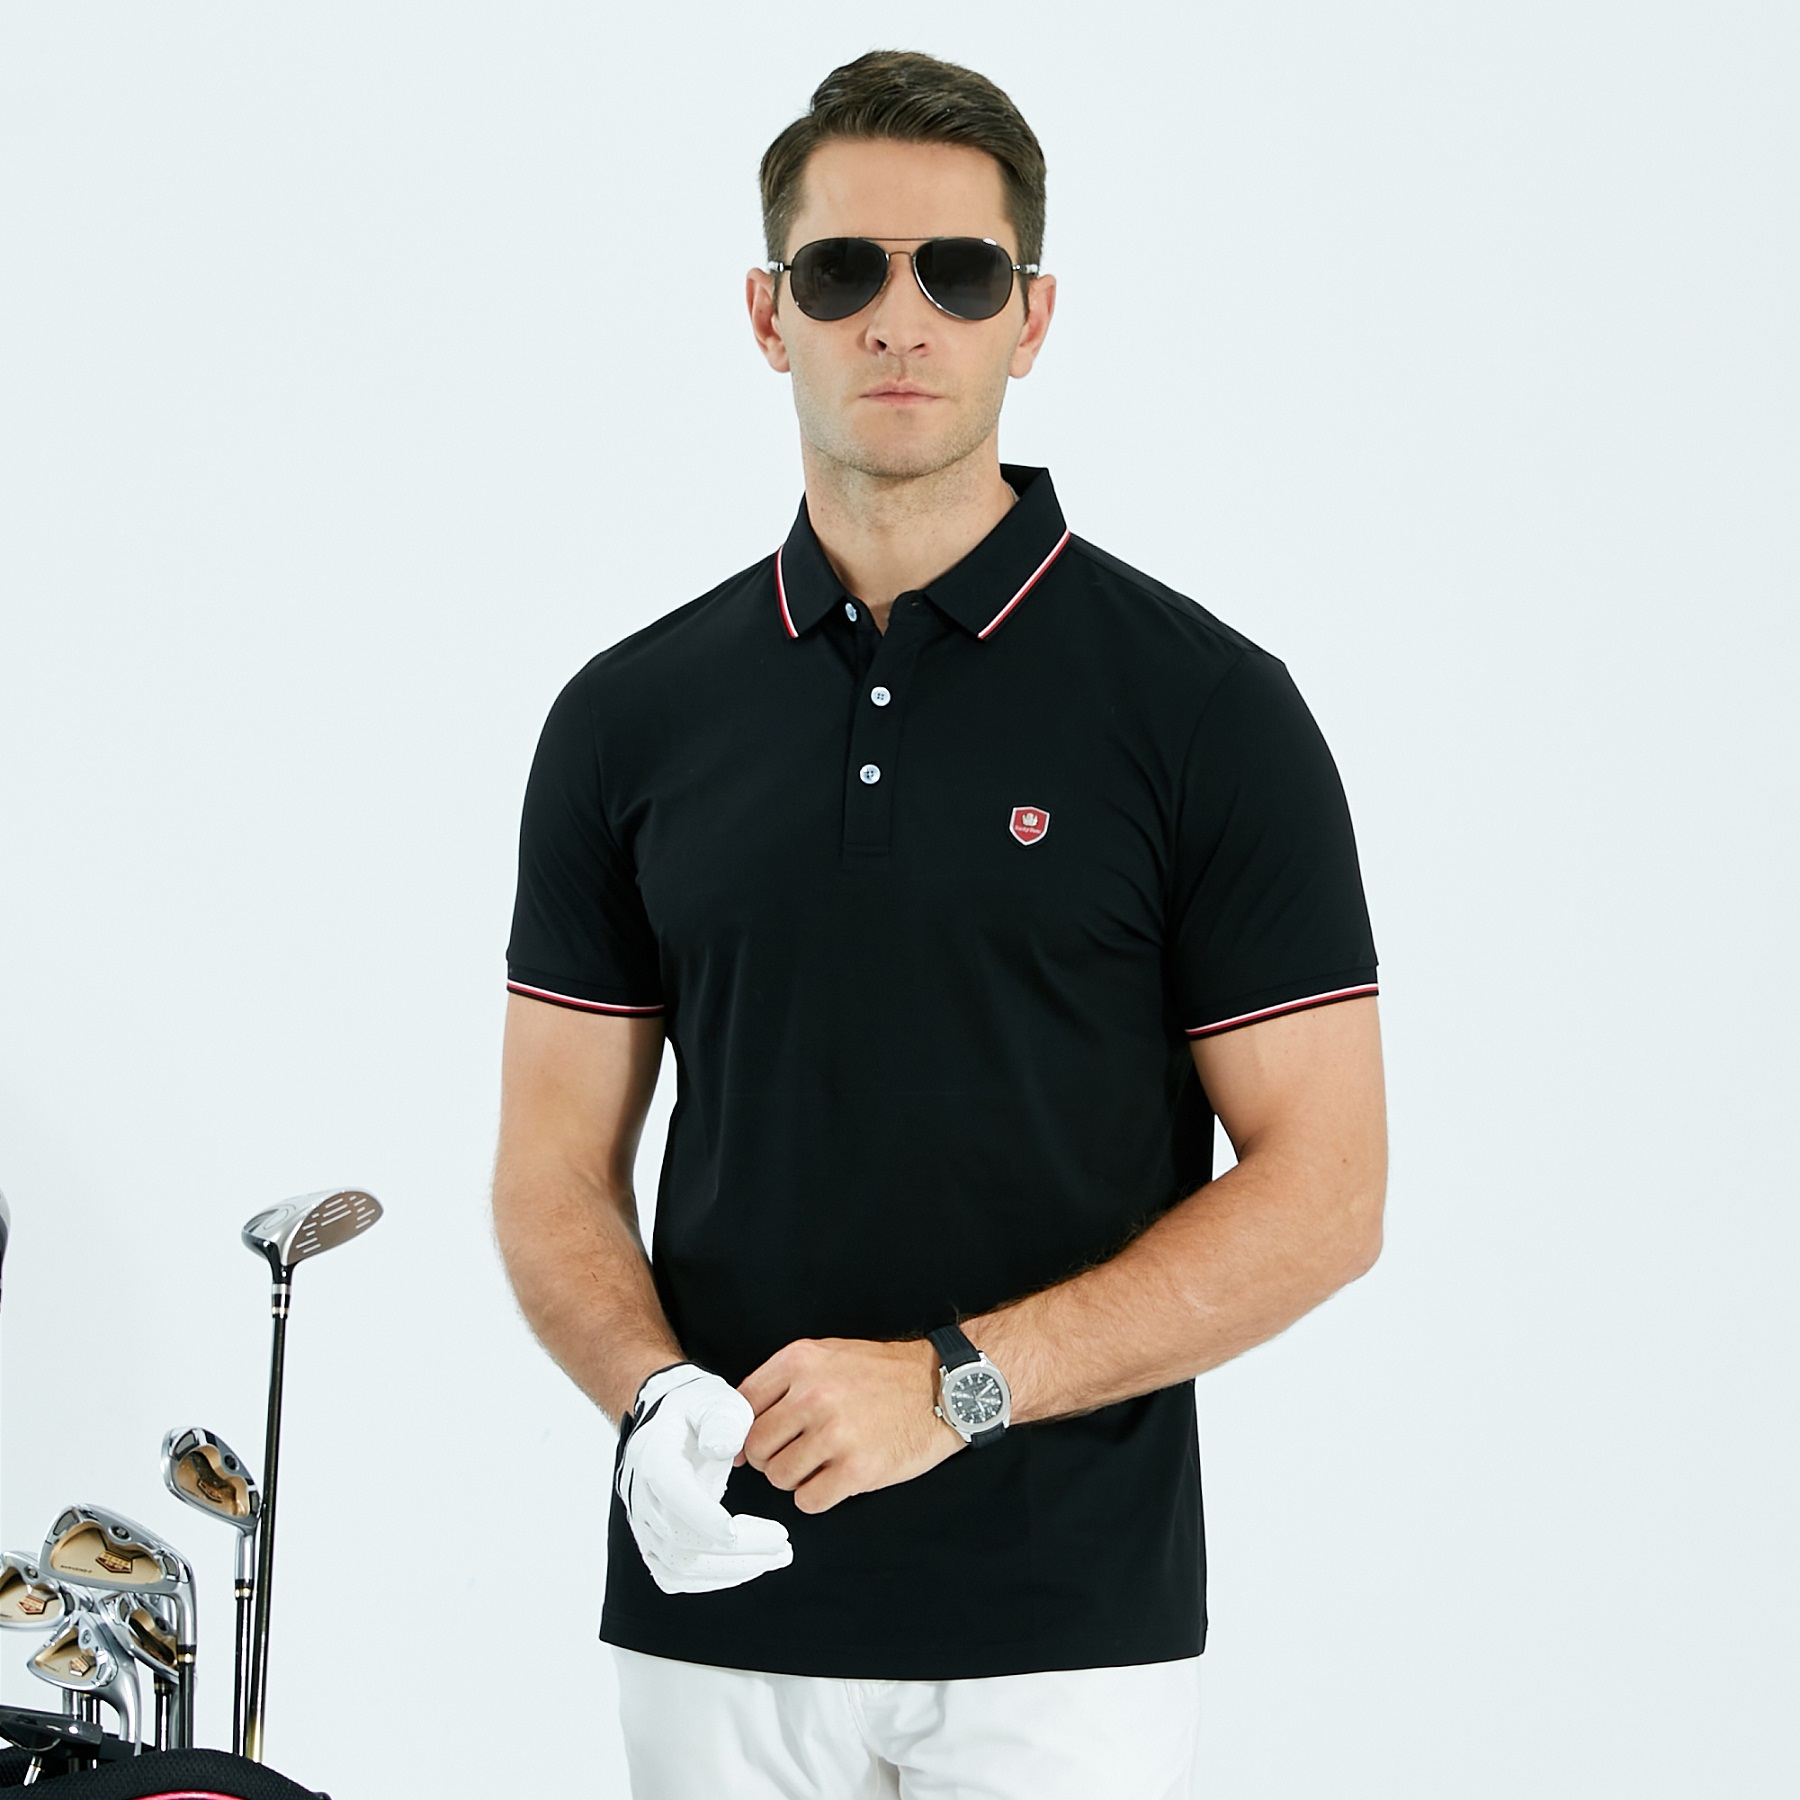 Pique Polo tshirts 100% Cotton plus size short sleeve Men’s Golf polo shirts Custom logo with your embroidered Men’s polo shirts